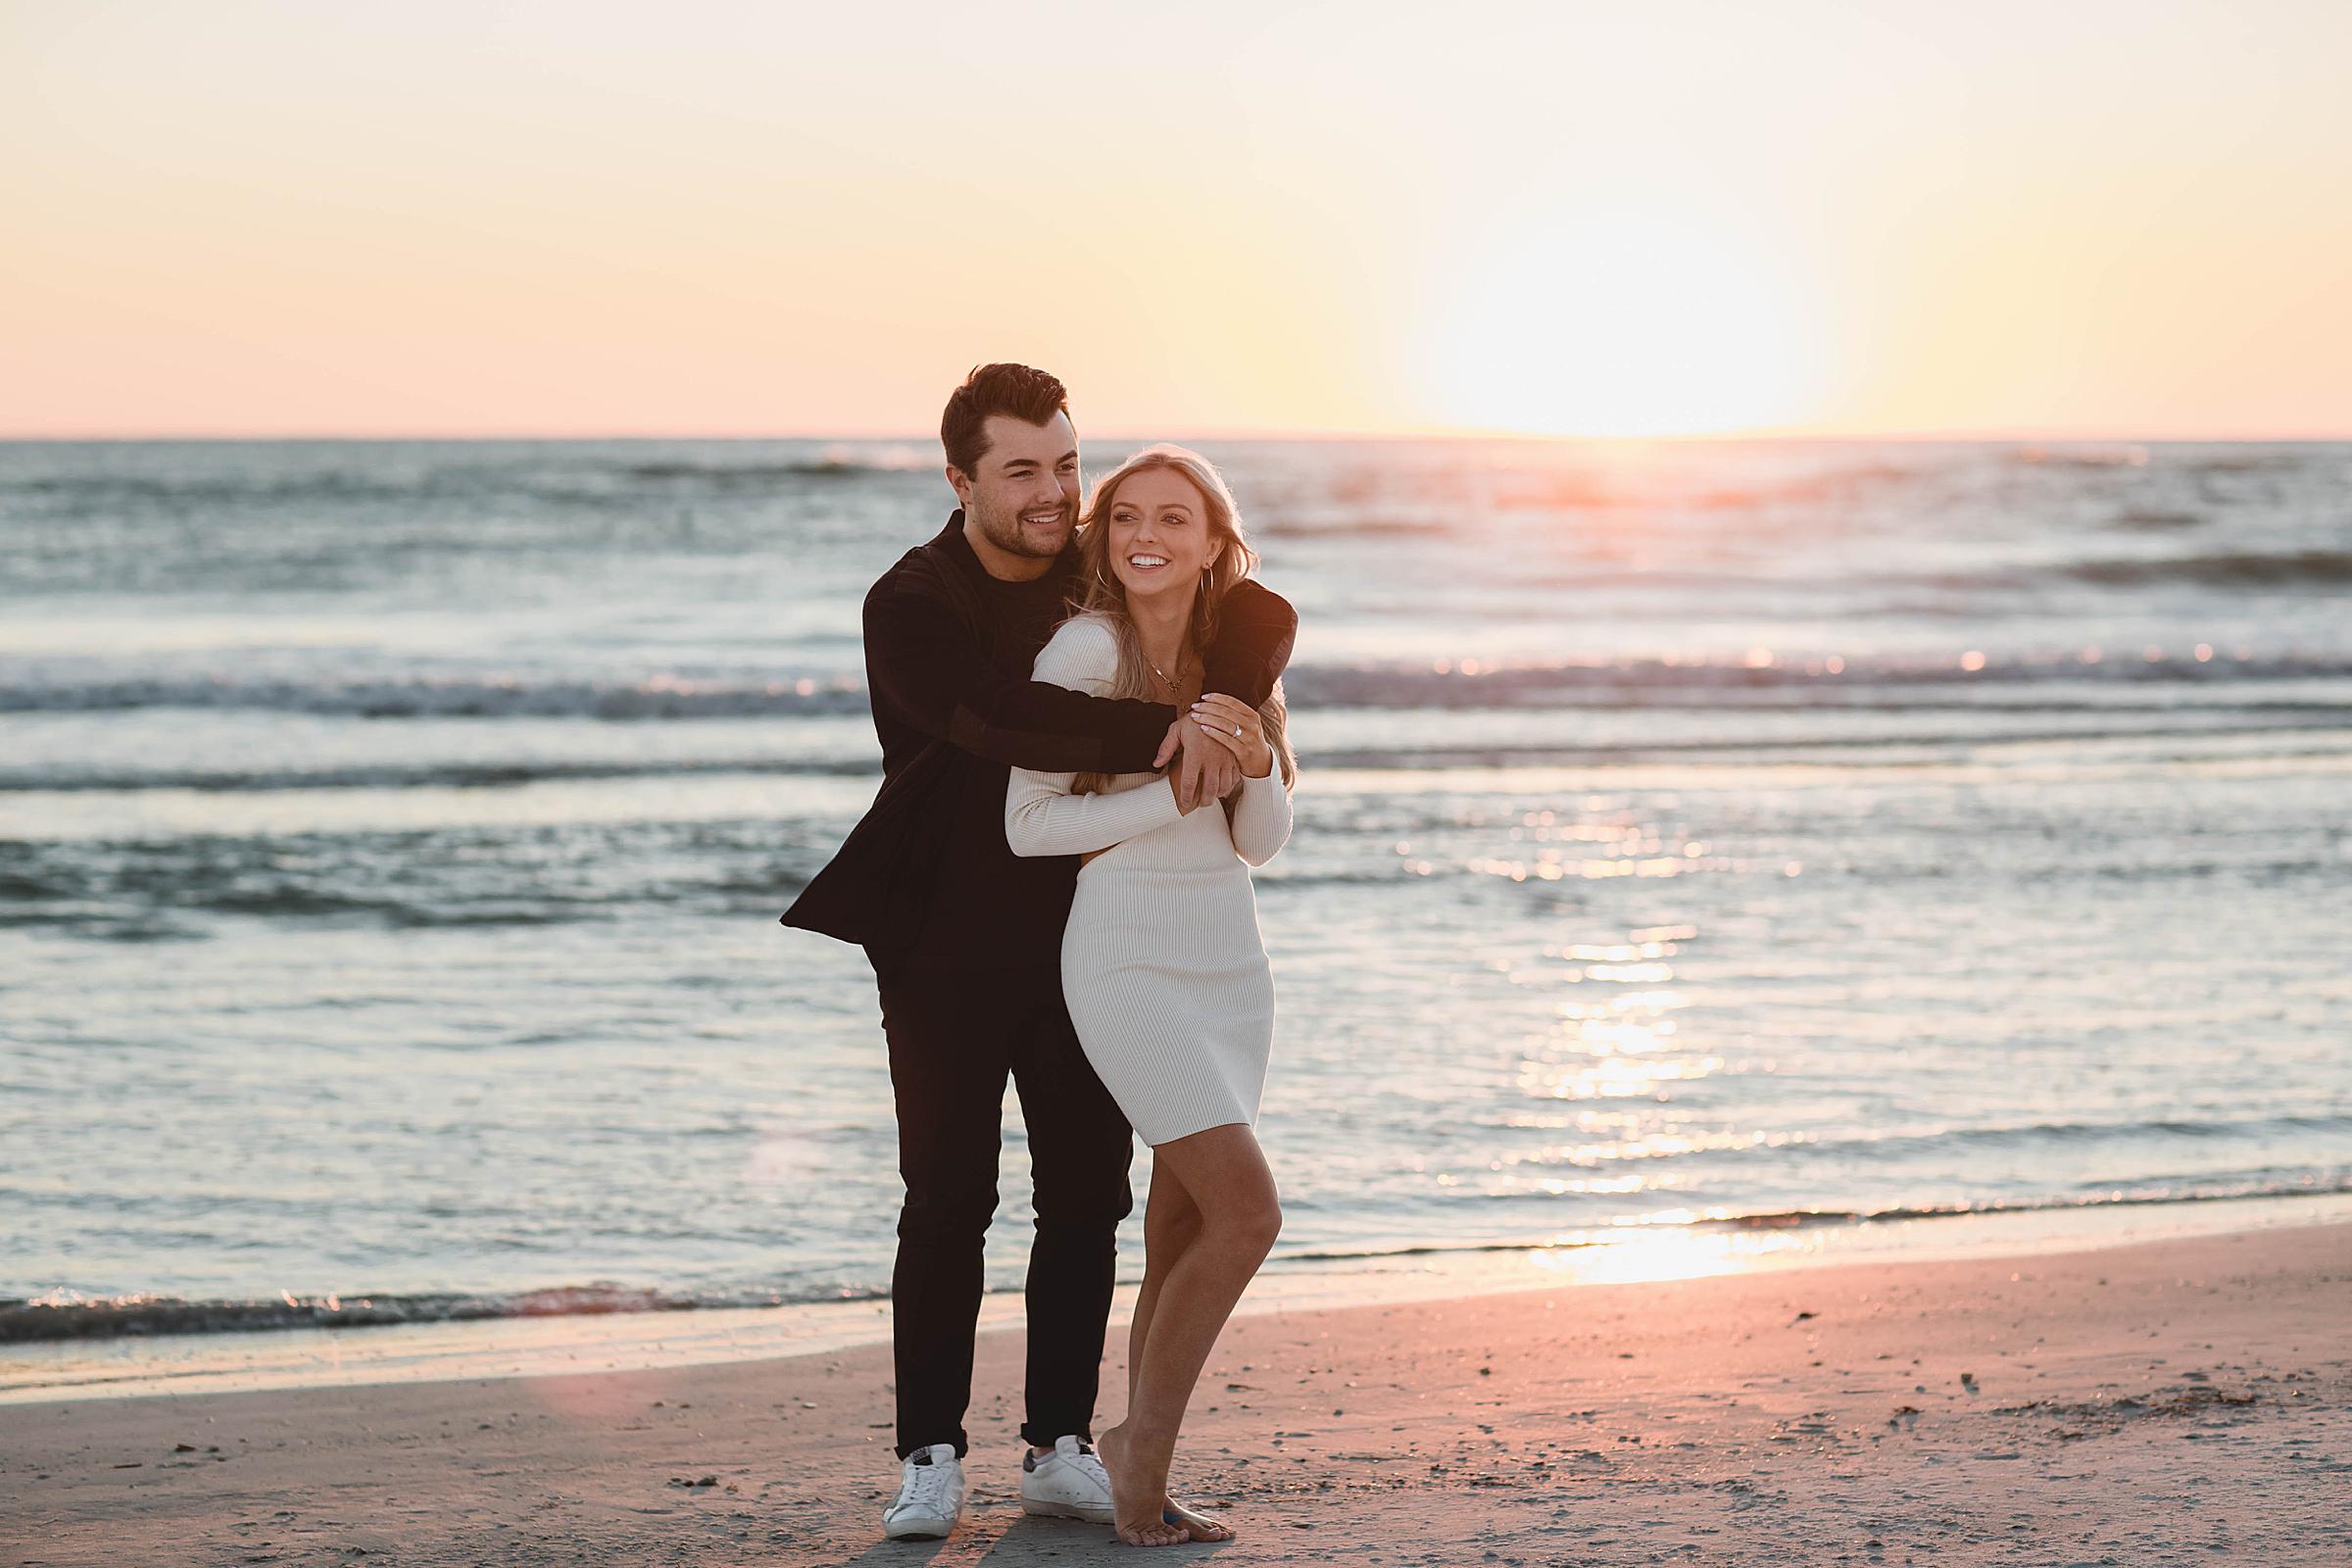 Couple smiling on beach, lido beach engagement photos after surprise proposal